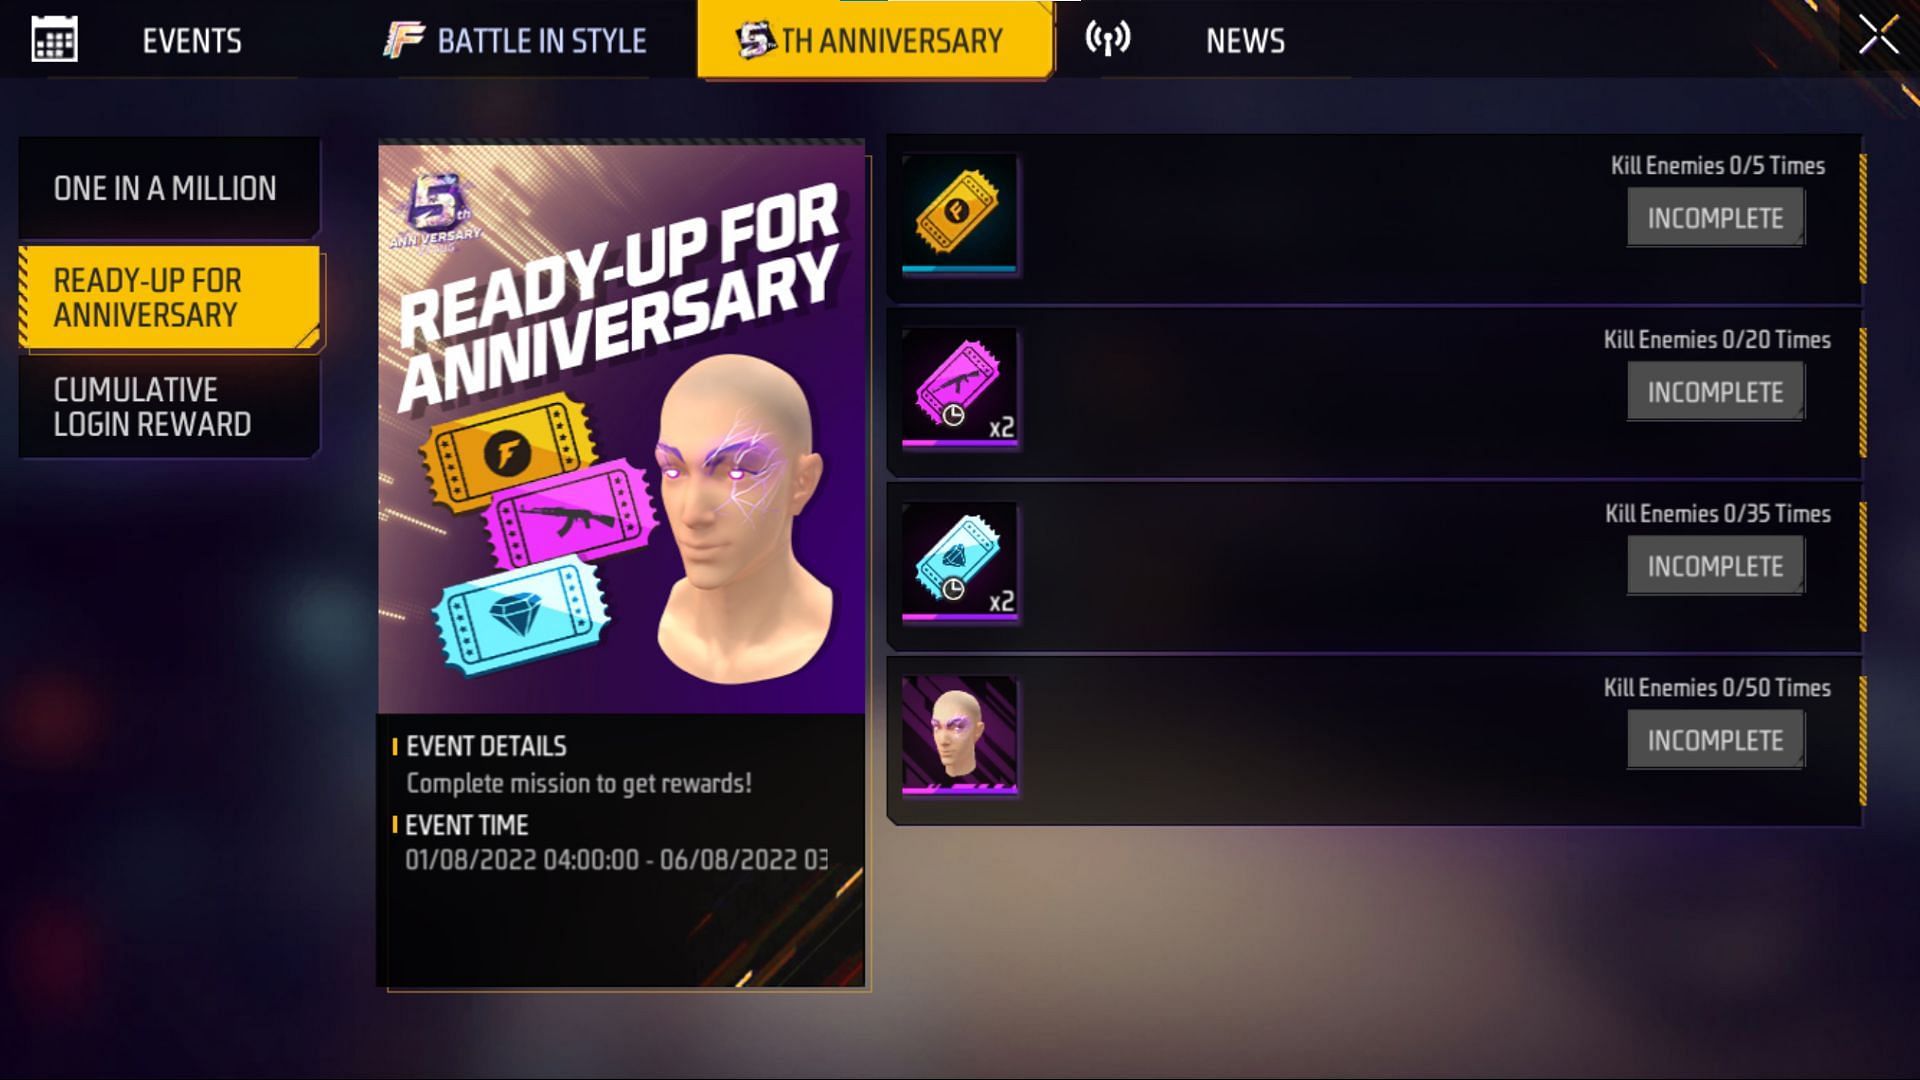 Ready-Up For Anniversary features four rewards (Image via Garena)